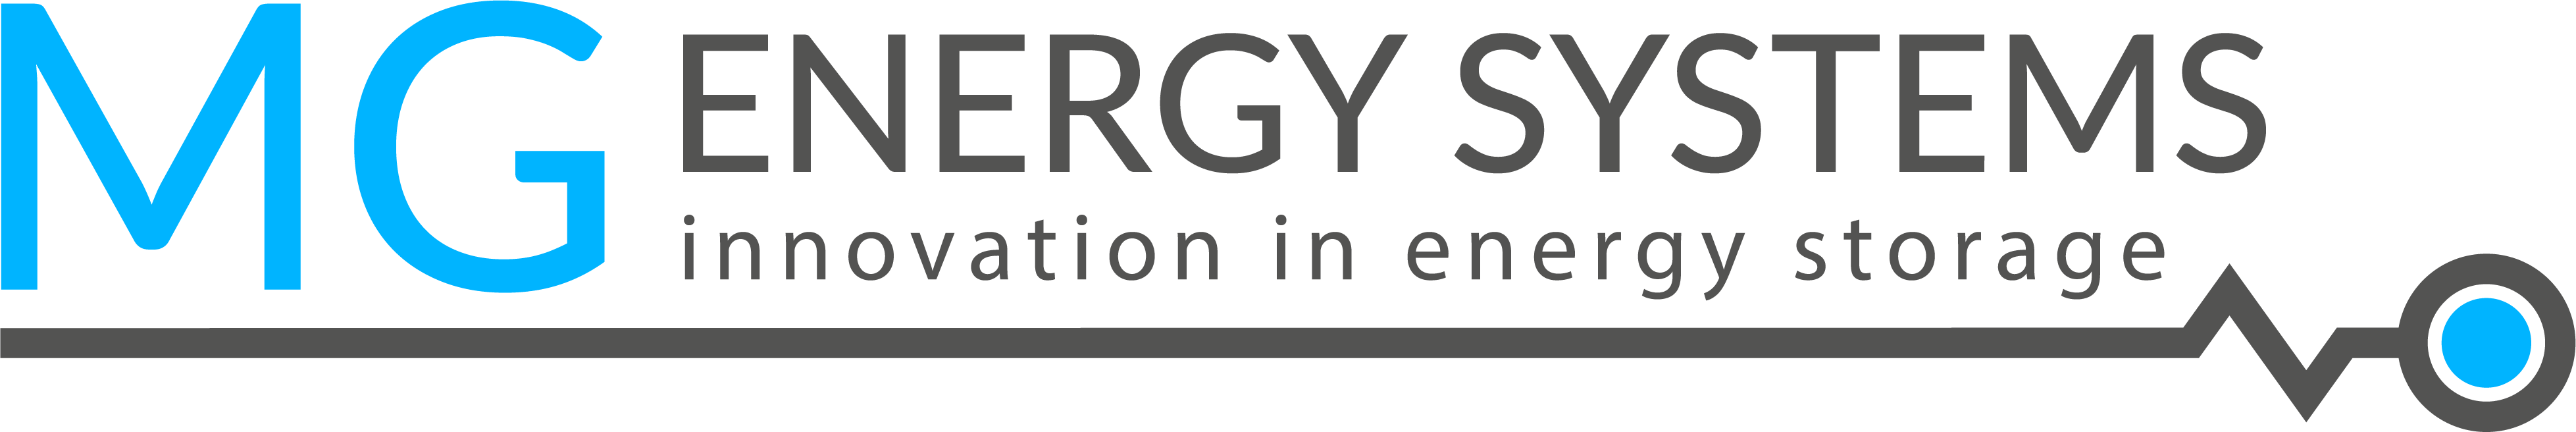 MG-Energy-Systems logo_png